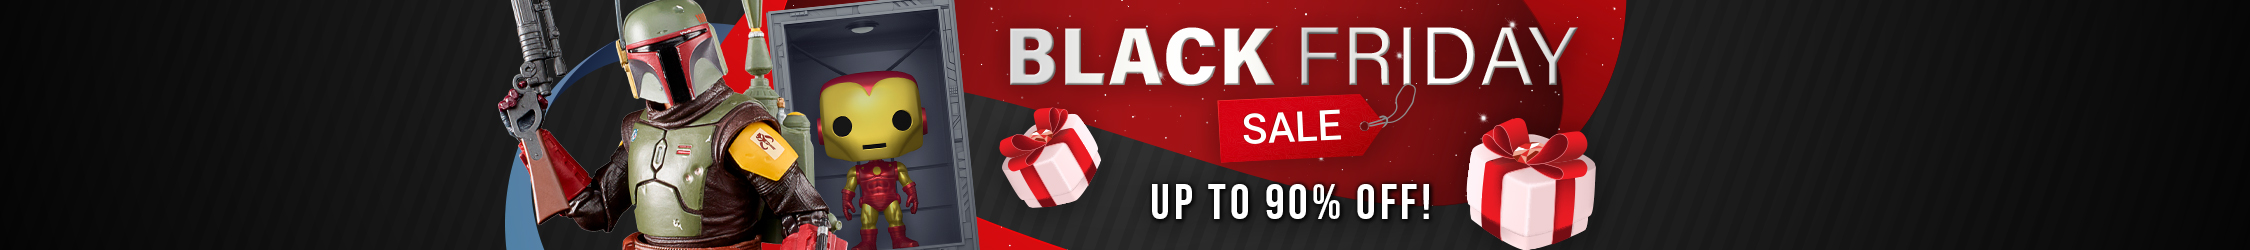 Black Friday Sale Up to 90% Off